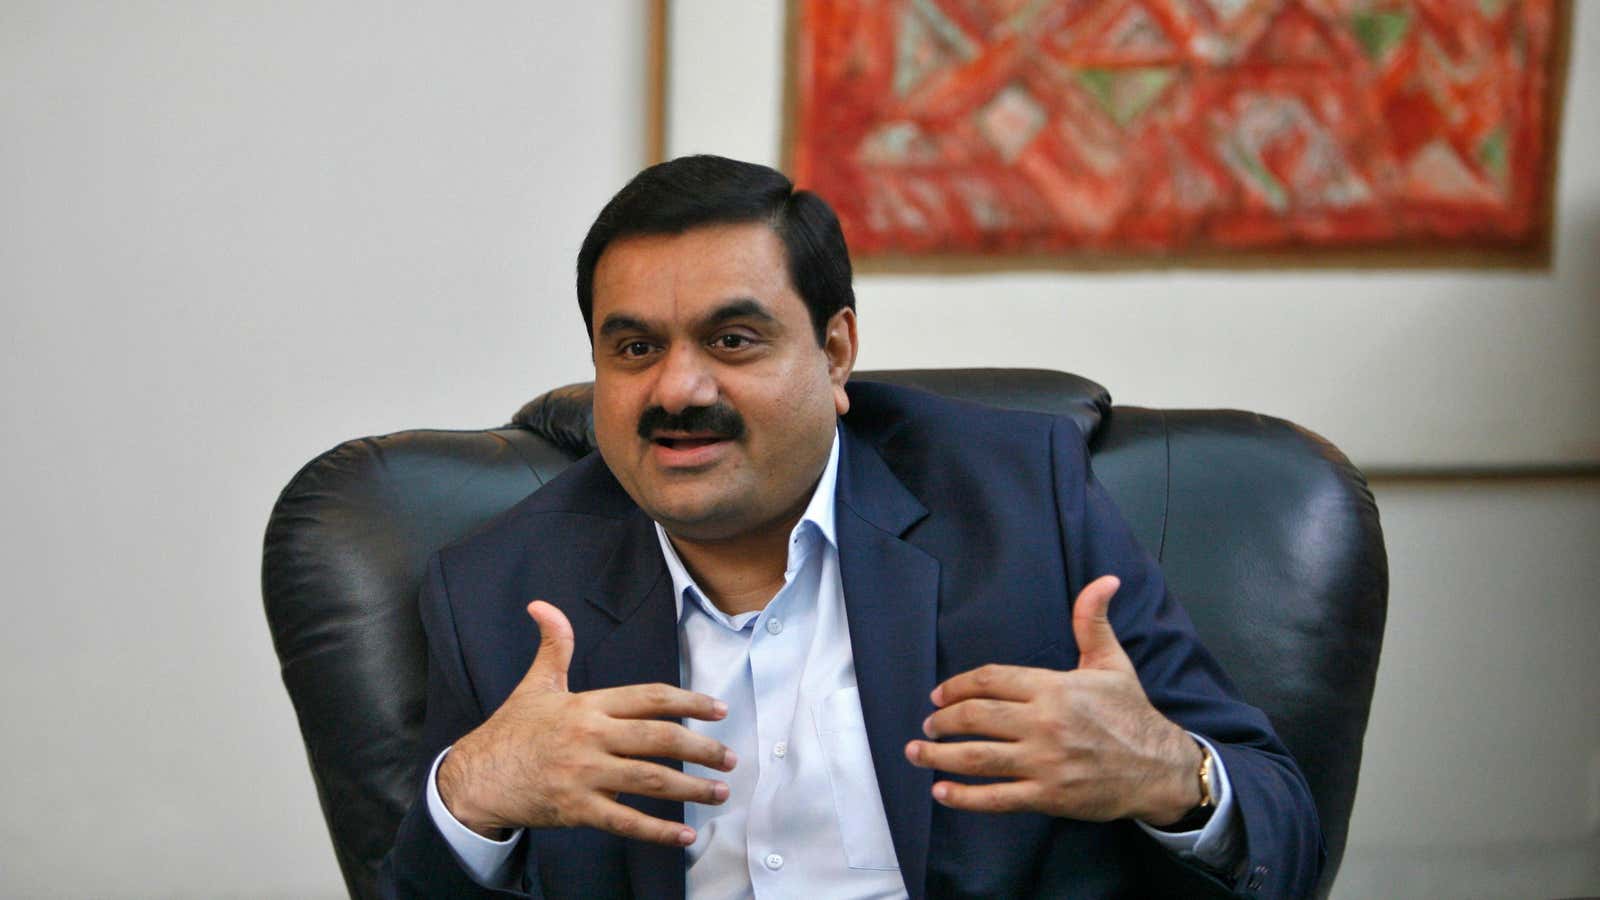 A New York research firm has accused Adani of pulling “the largest con in corporate history”